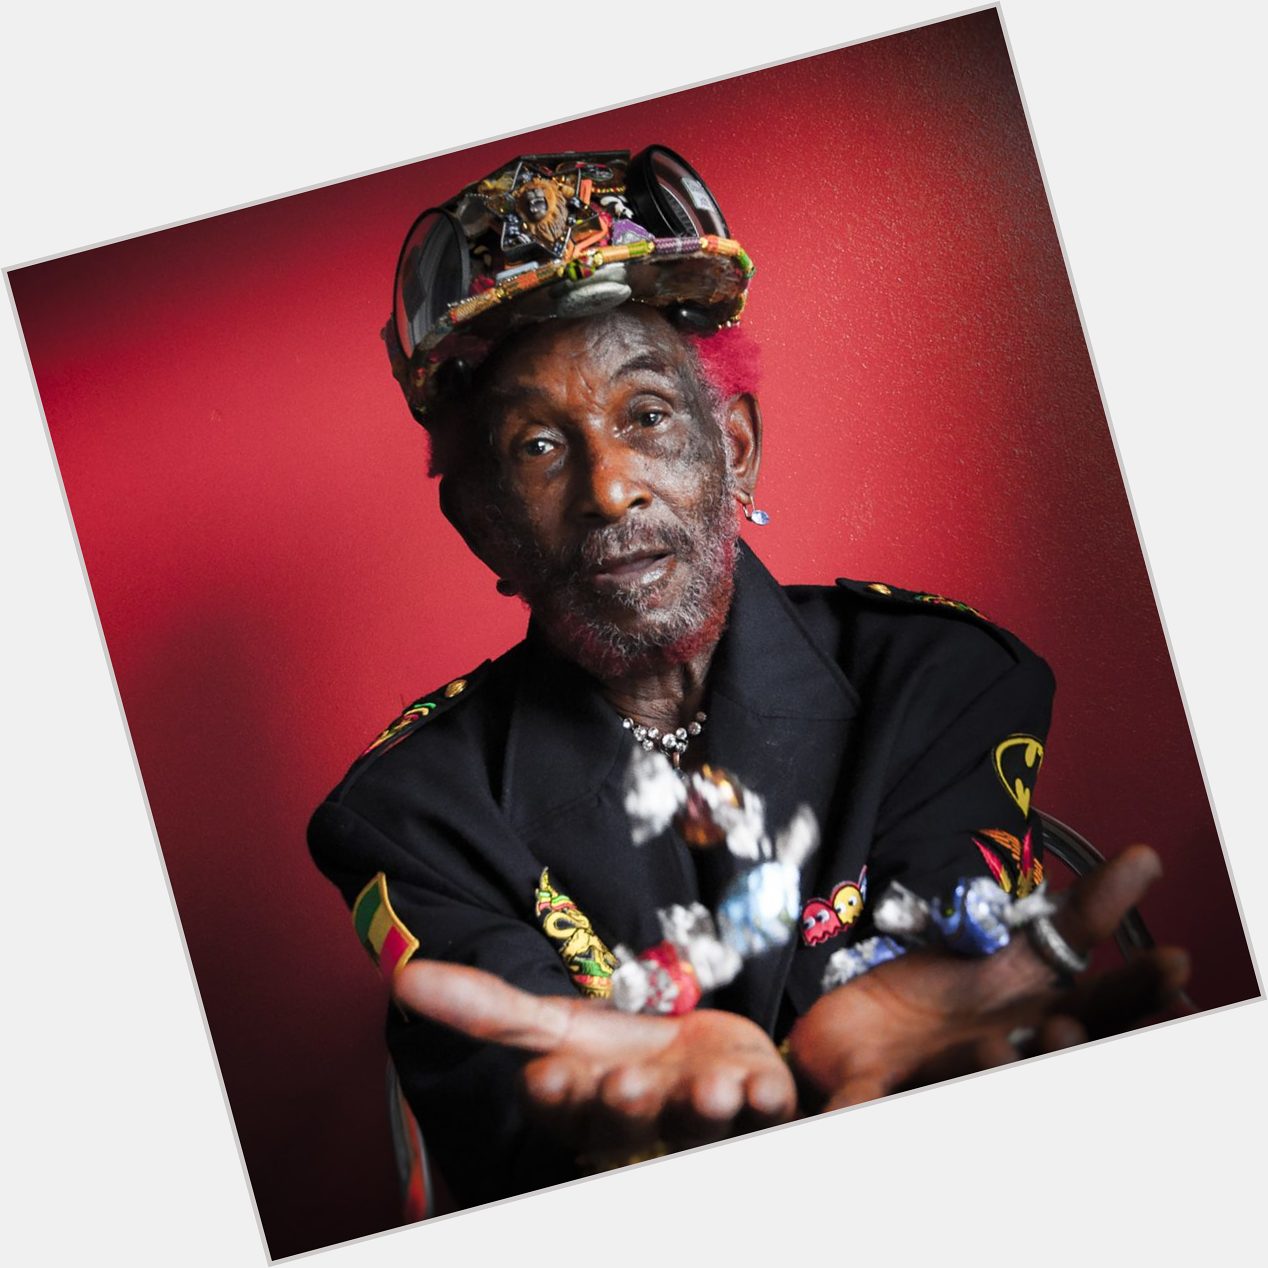 Lee Scratch Perry birthday 2015